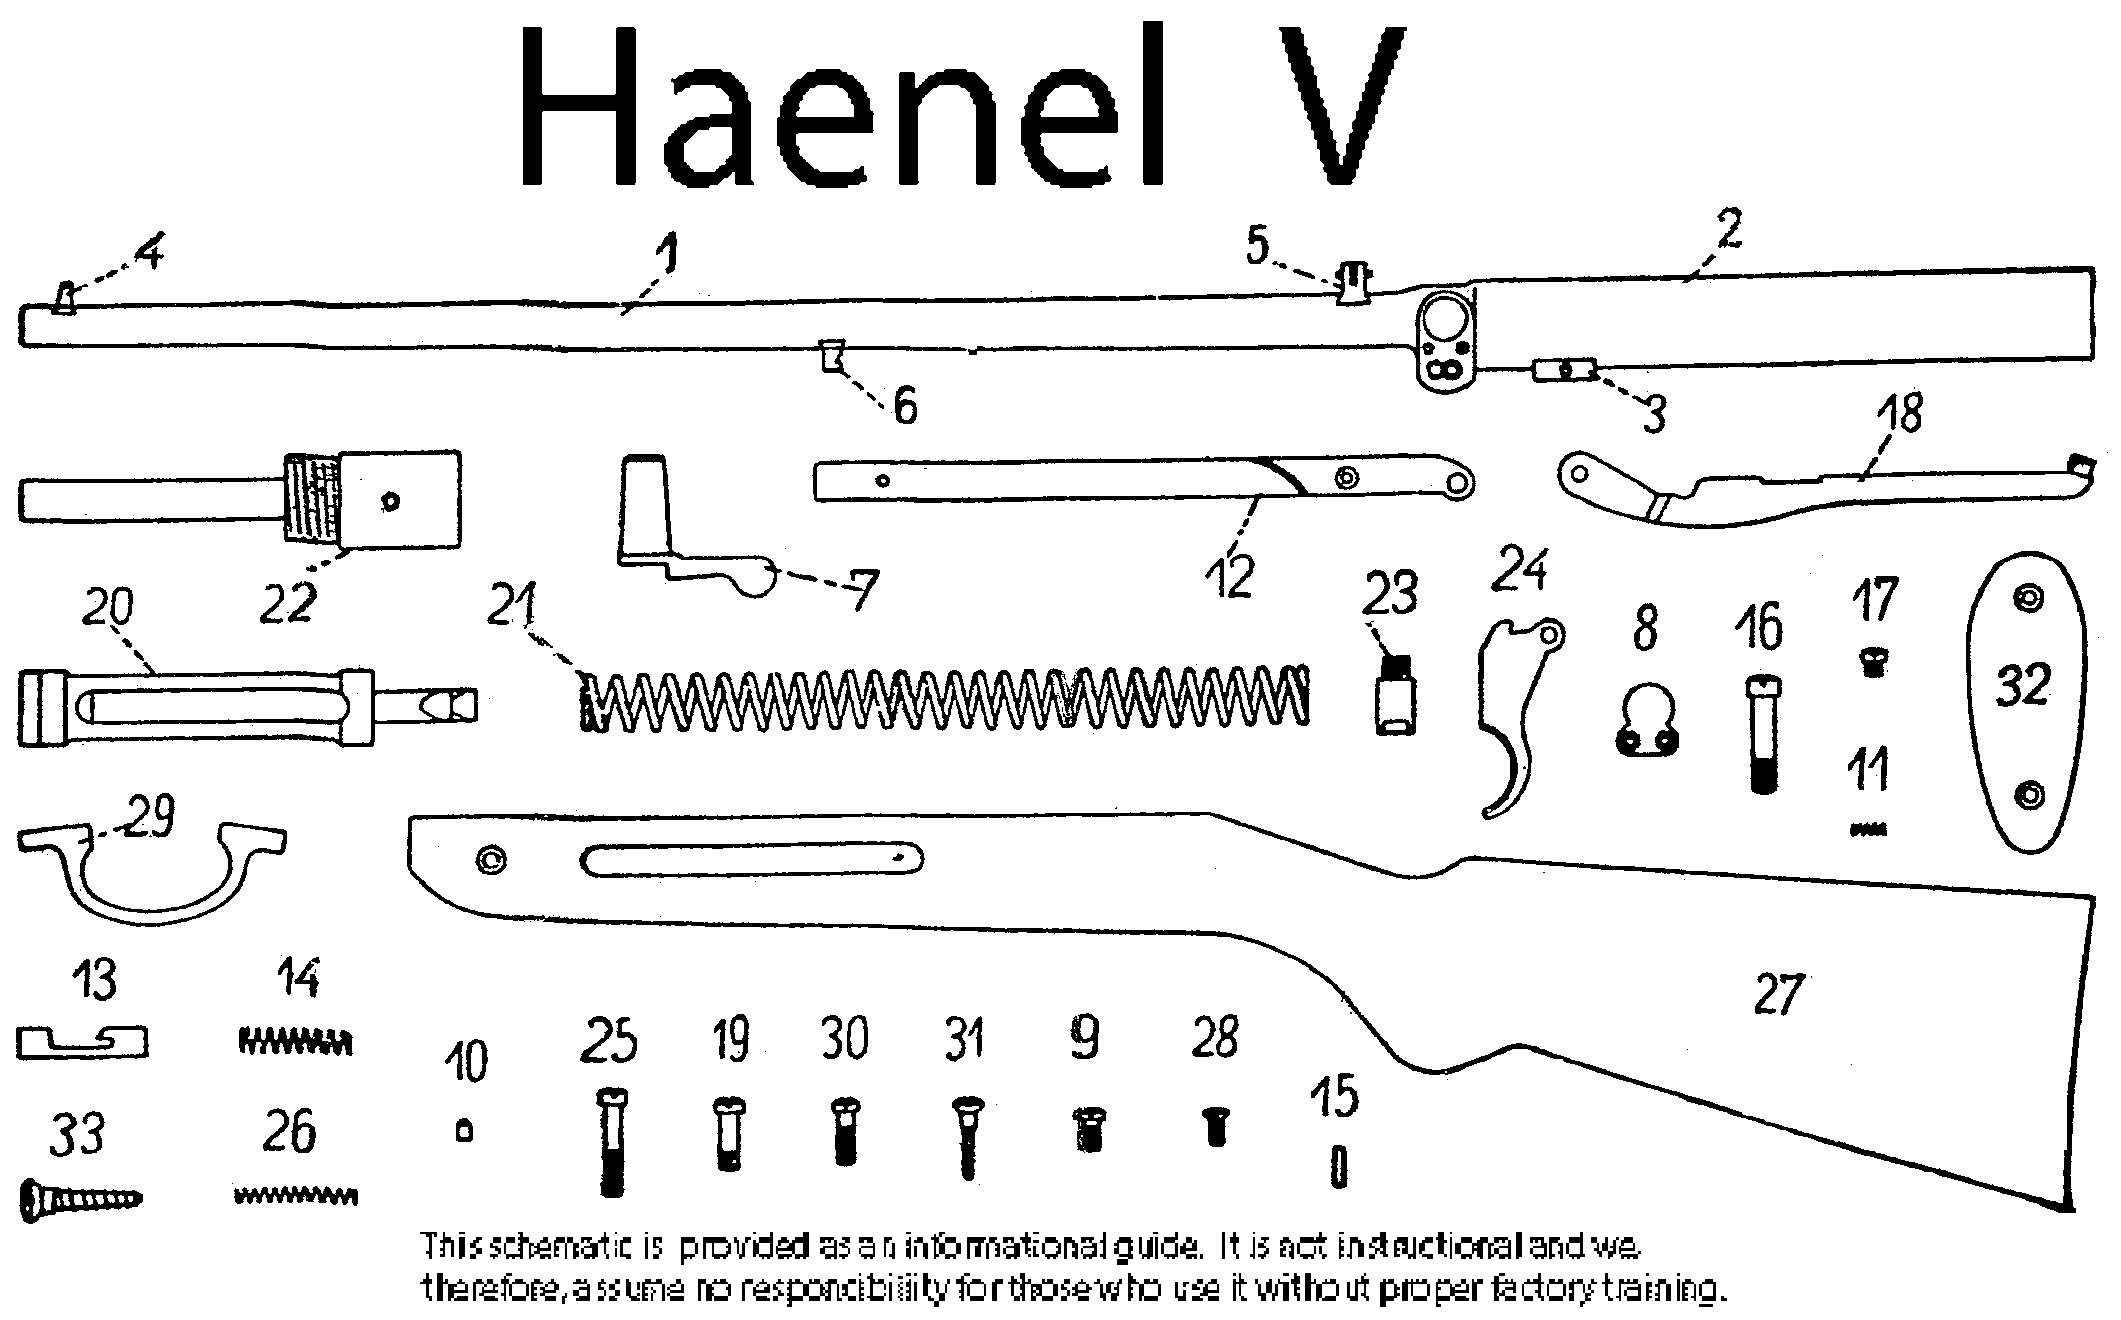 IV and V Schematic